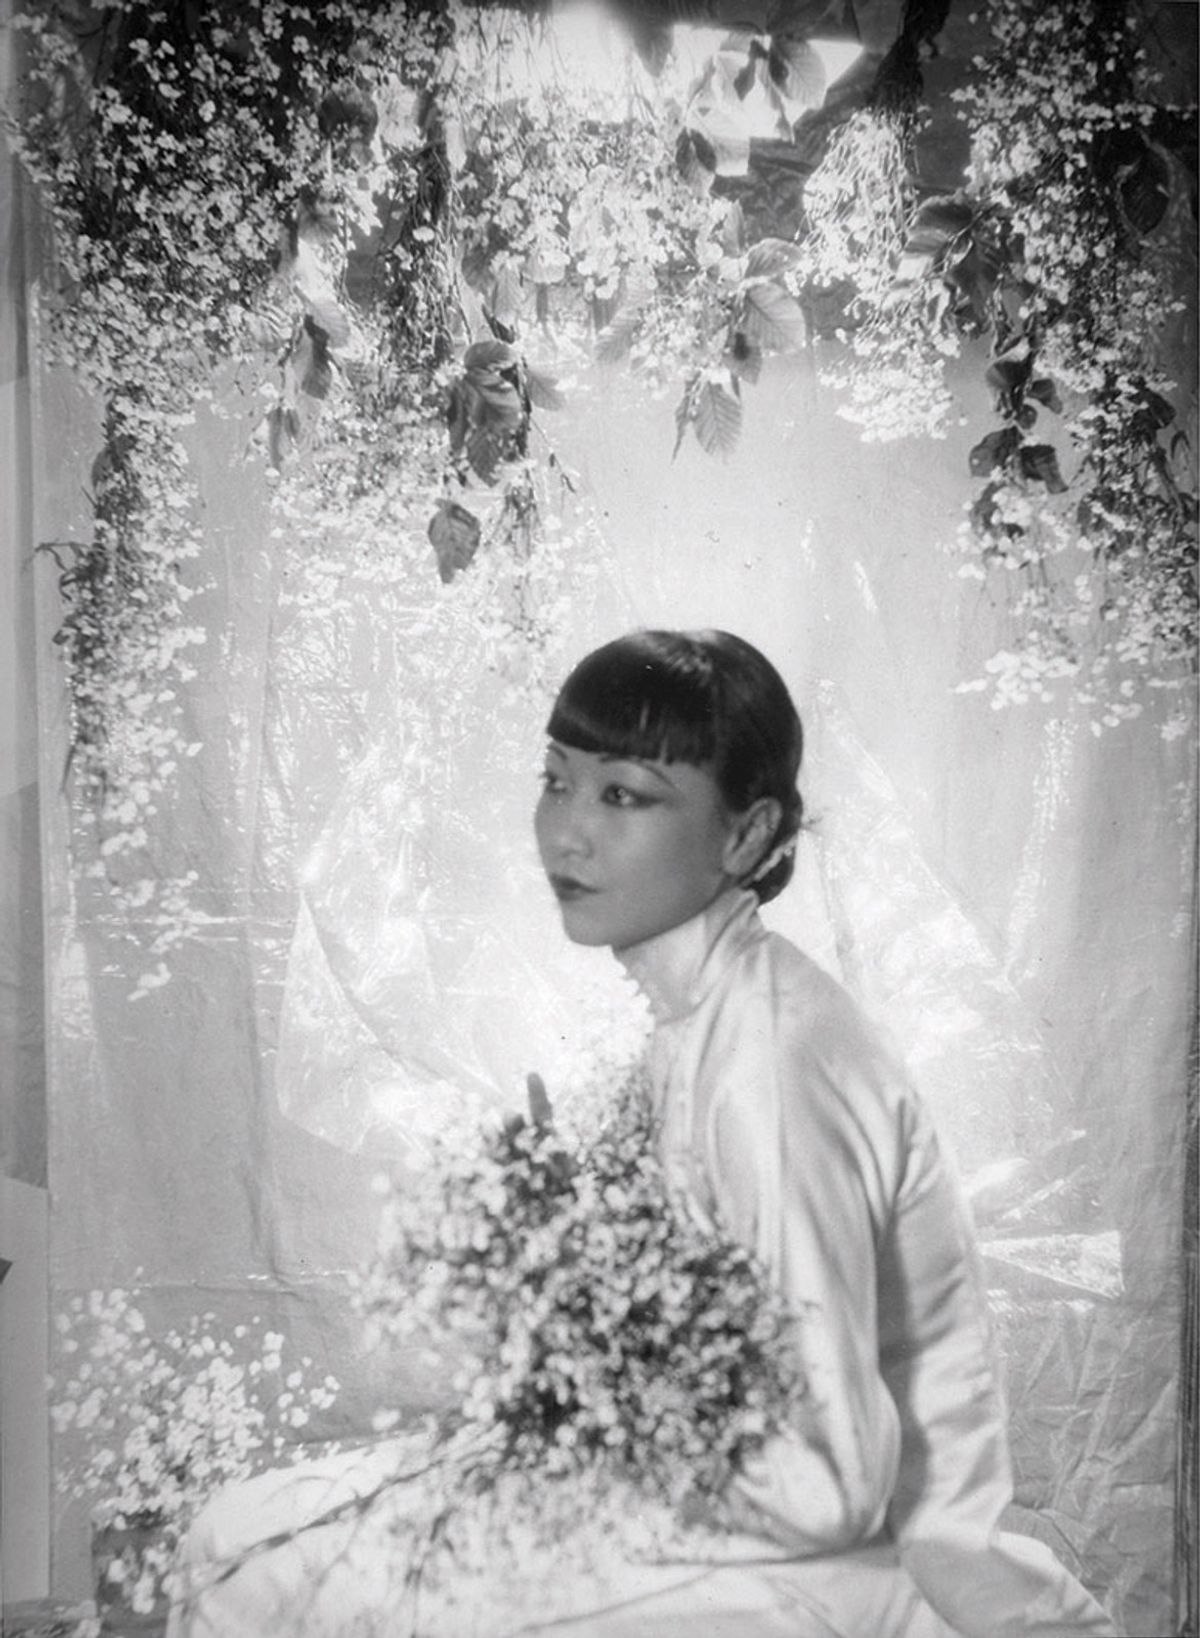 Anna May Wong photographed by Cecil Beaton in 1929 © The Cecil Beaton Studio Archive at Sotheby’s